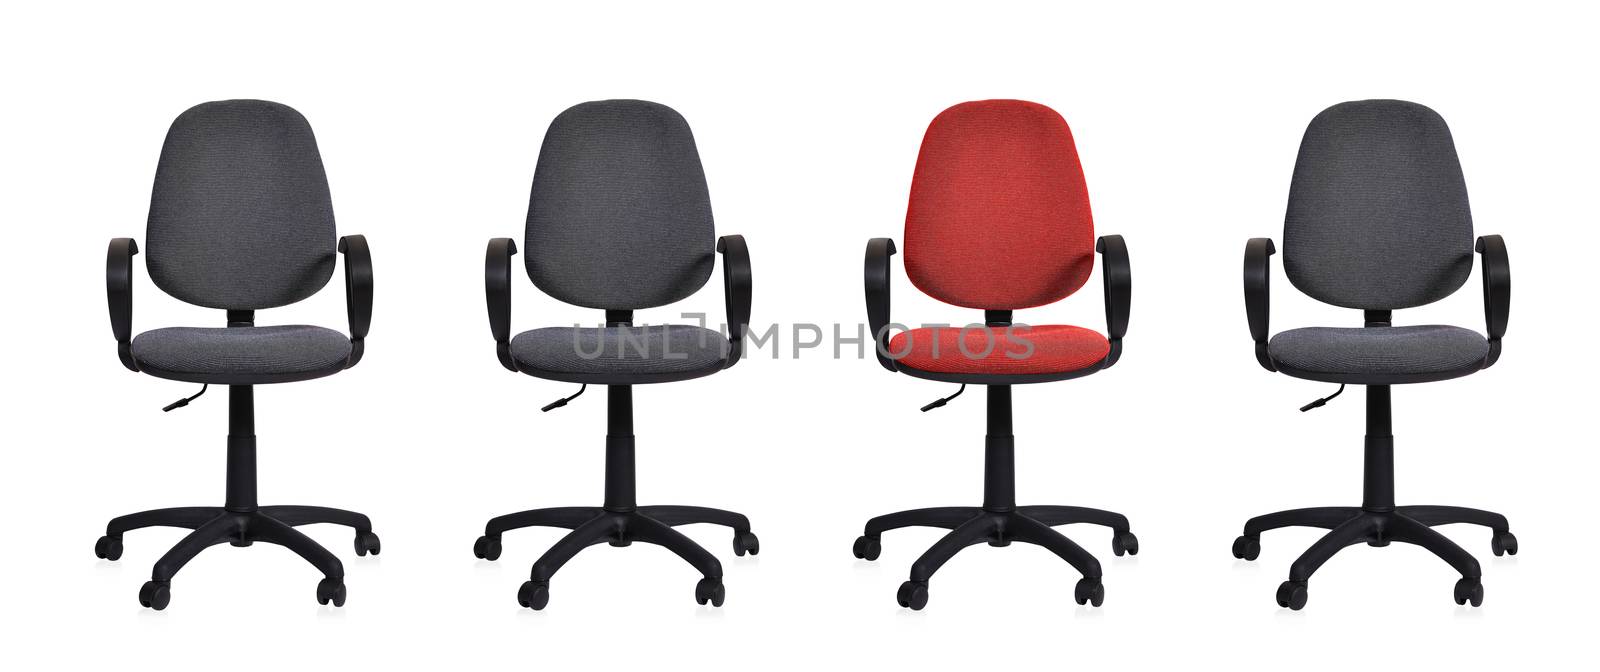 four office chair by vetkit